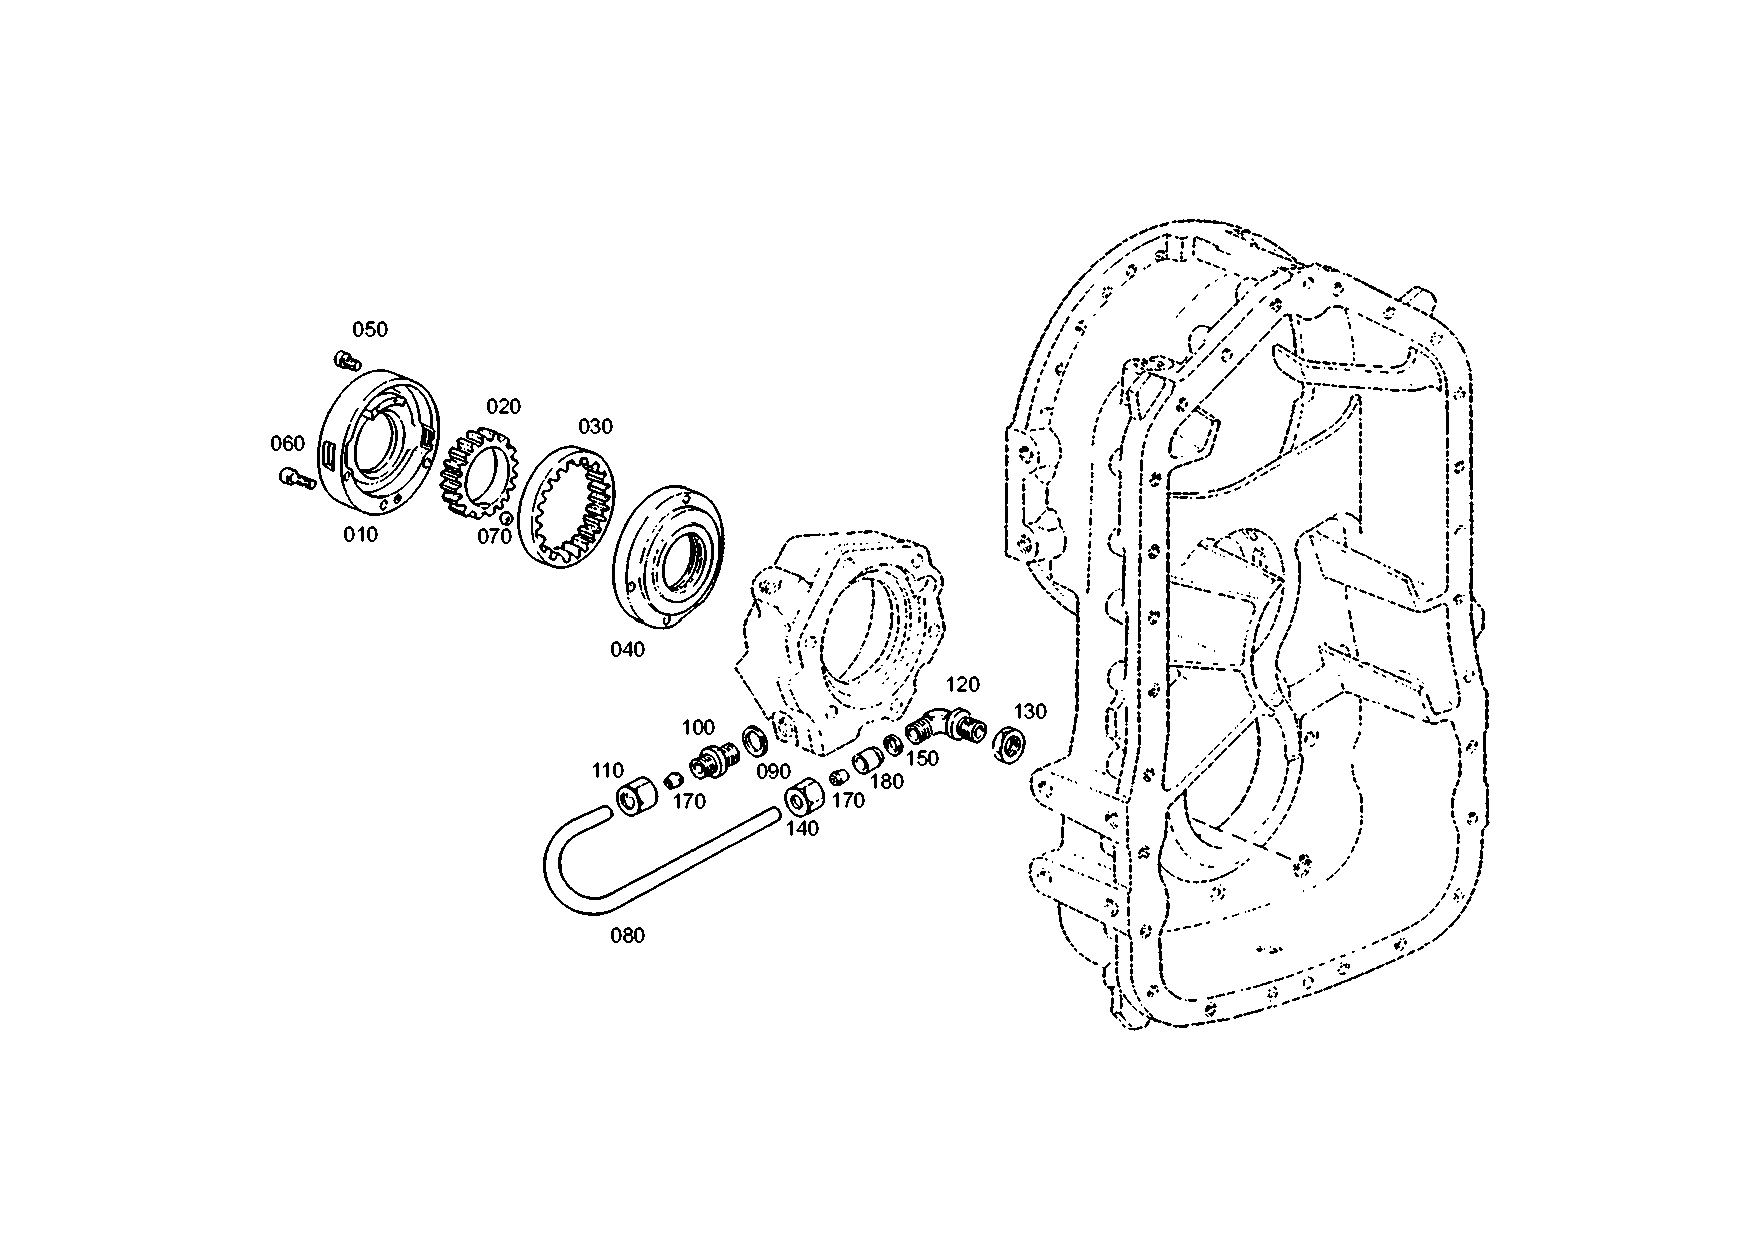 drawing for RABA 199114250259 - PUMP HOUSING (figure 1)